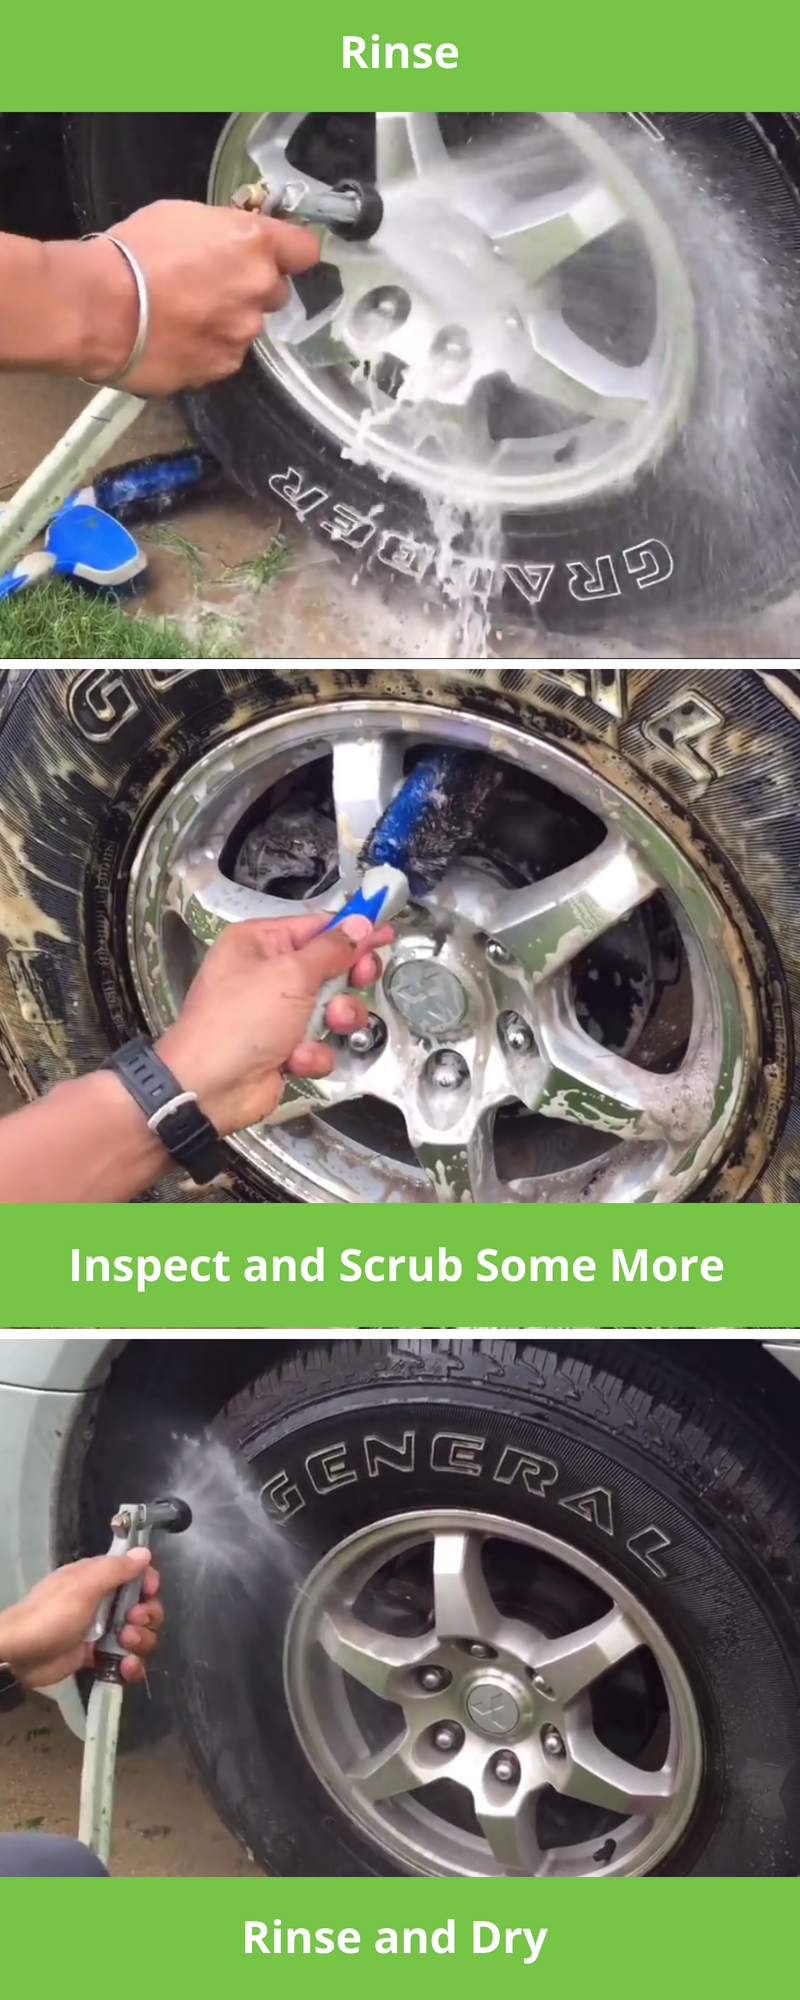 How to Properly Clean Your Car_s Wheels - WITH TEXT - 2